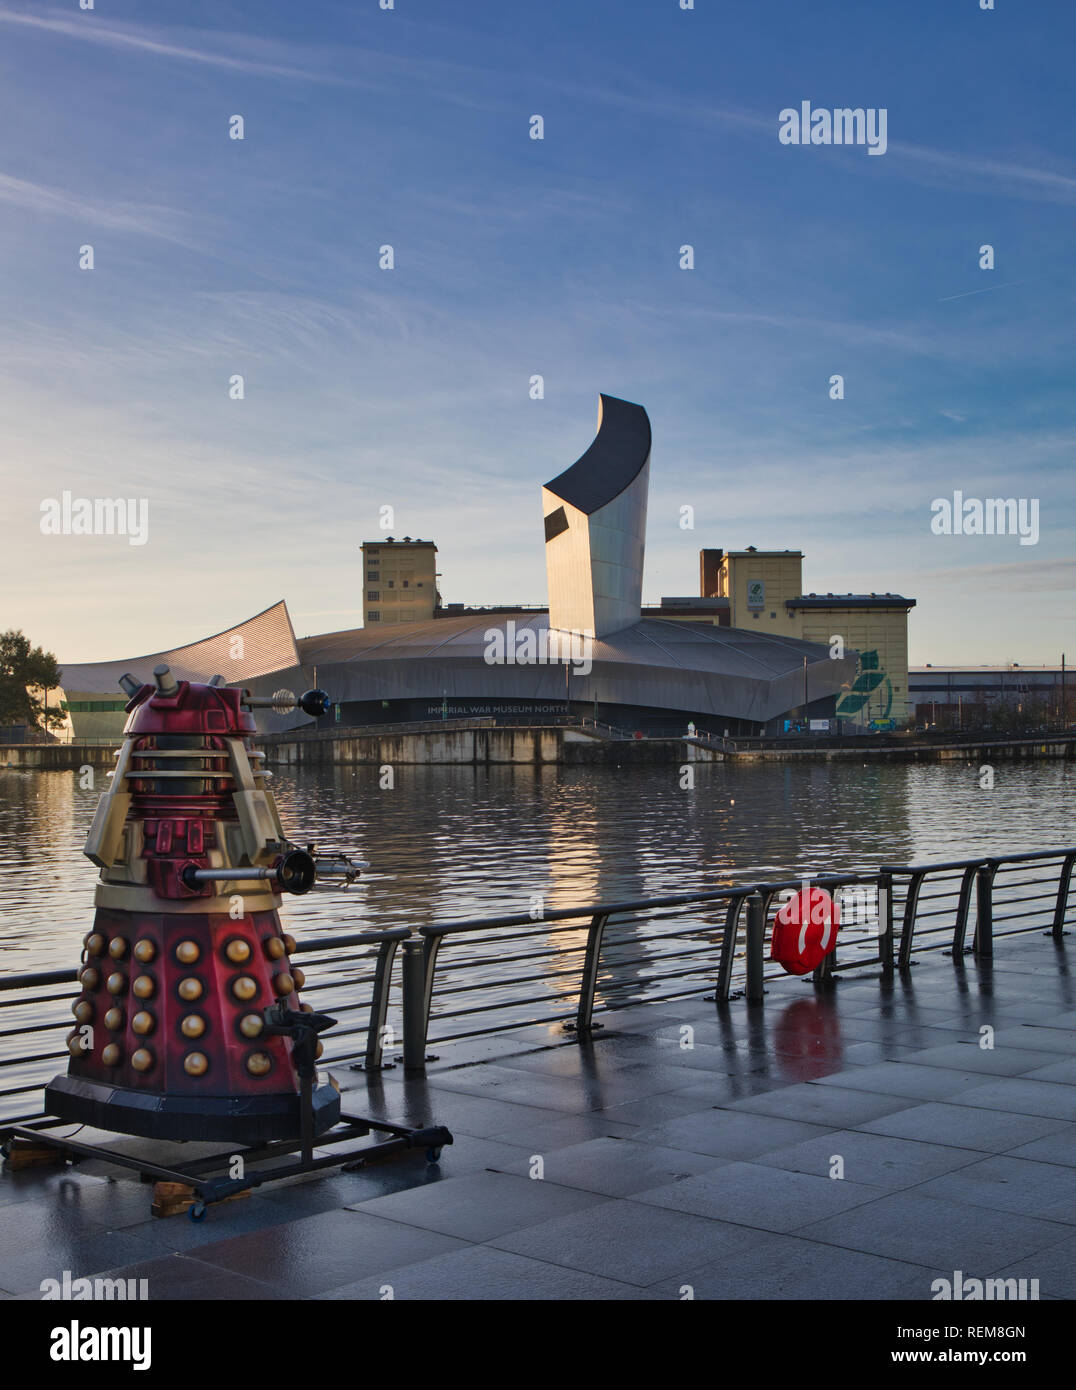 Dalek on display by the Manchester Ship Canal with Imperial War Museum North in the background, MediaCityUK, Salford Quays, Greater Manchester, U.K. Stock Photo